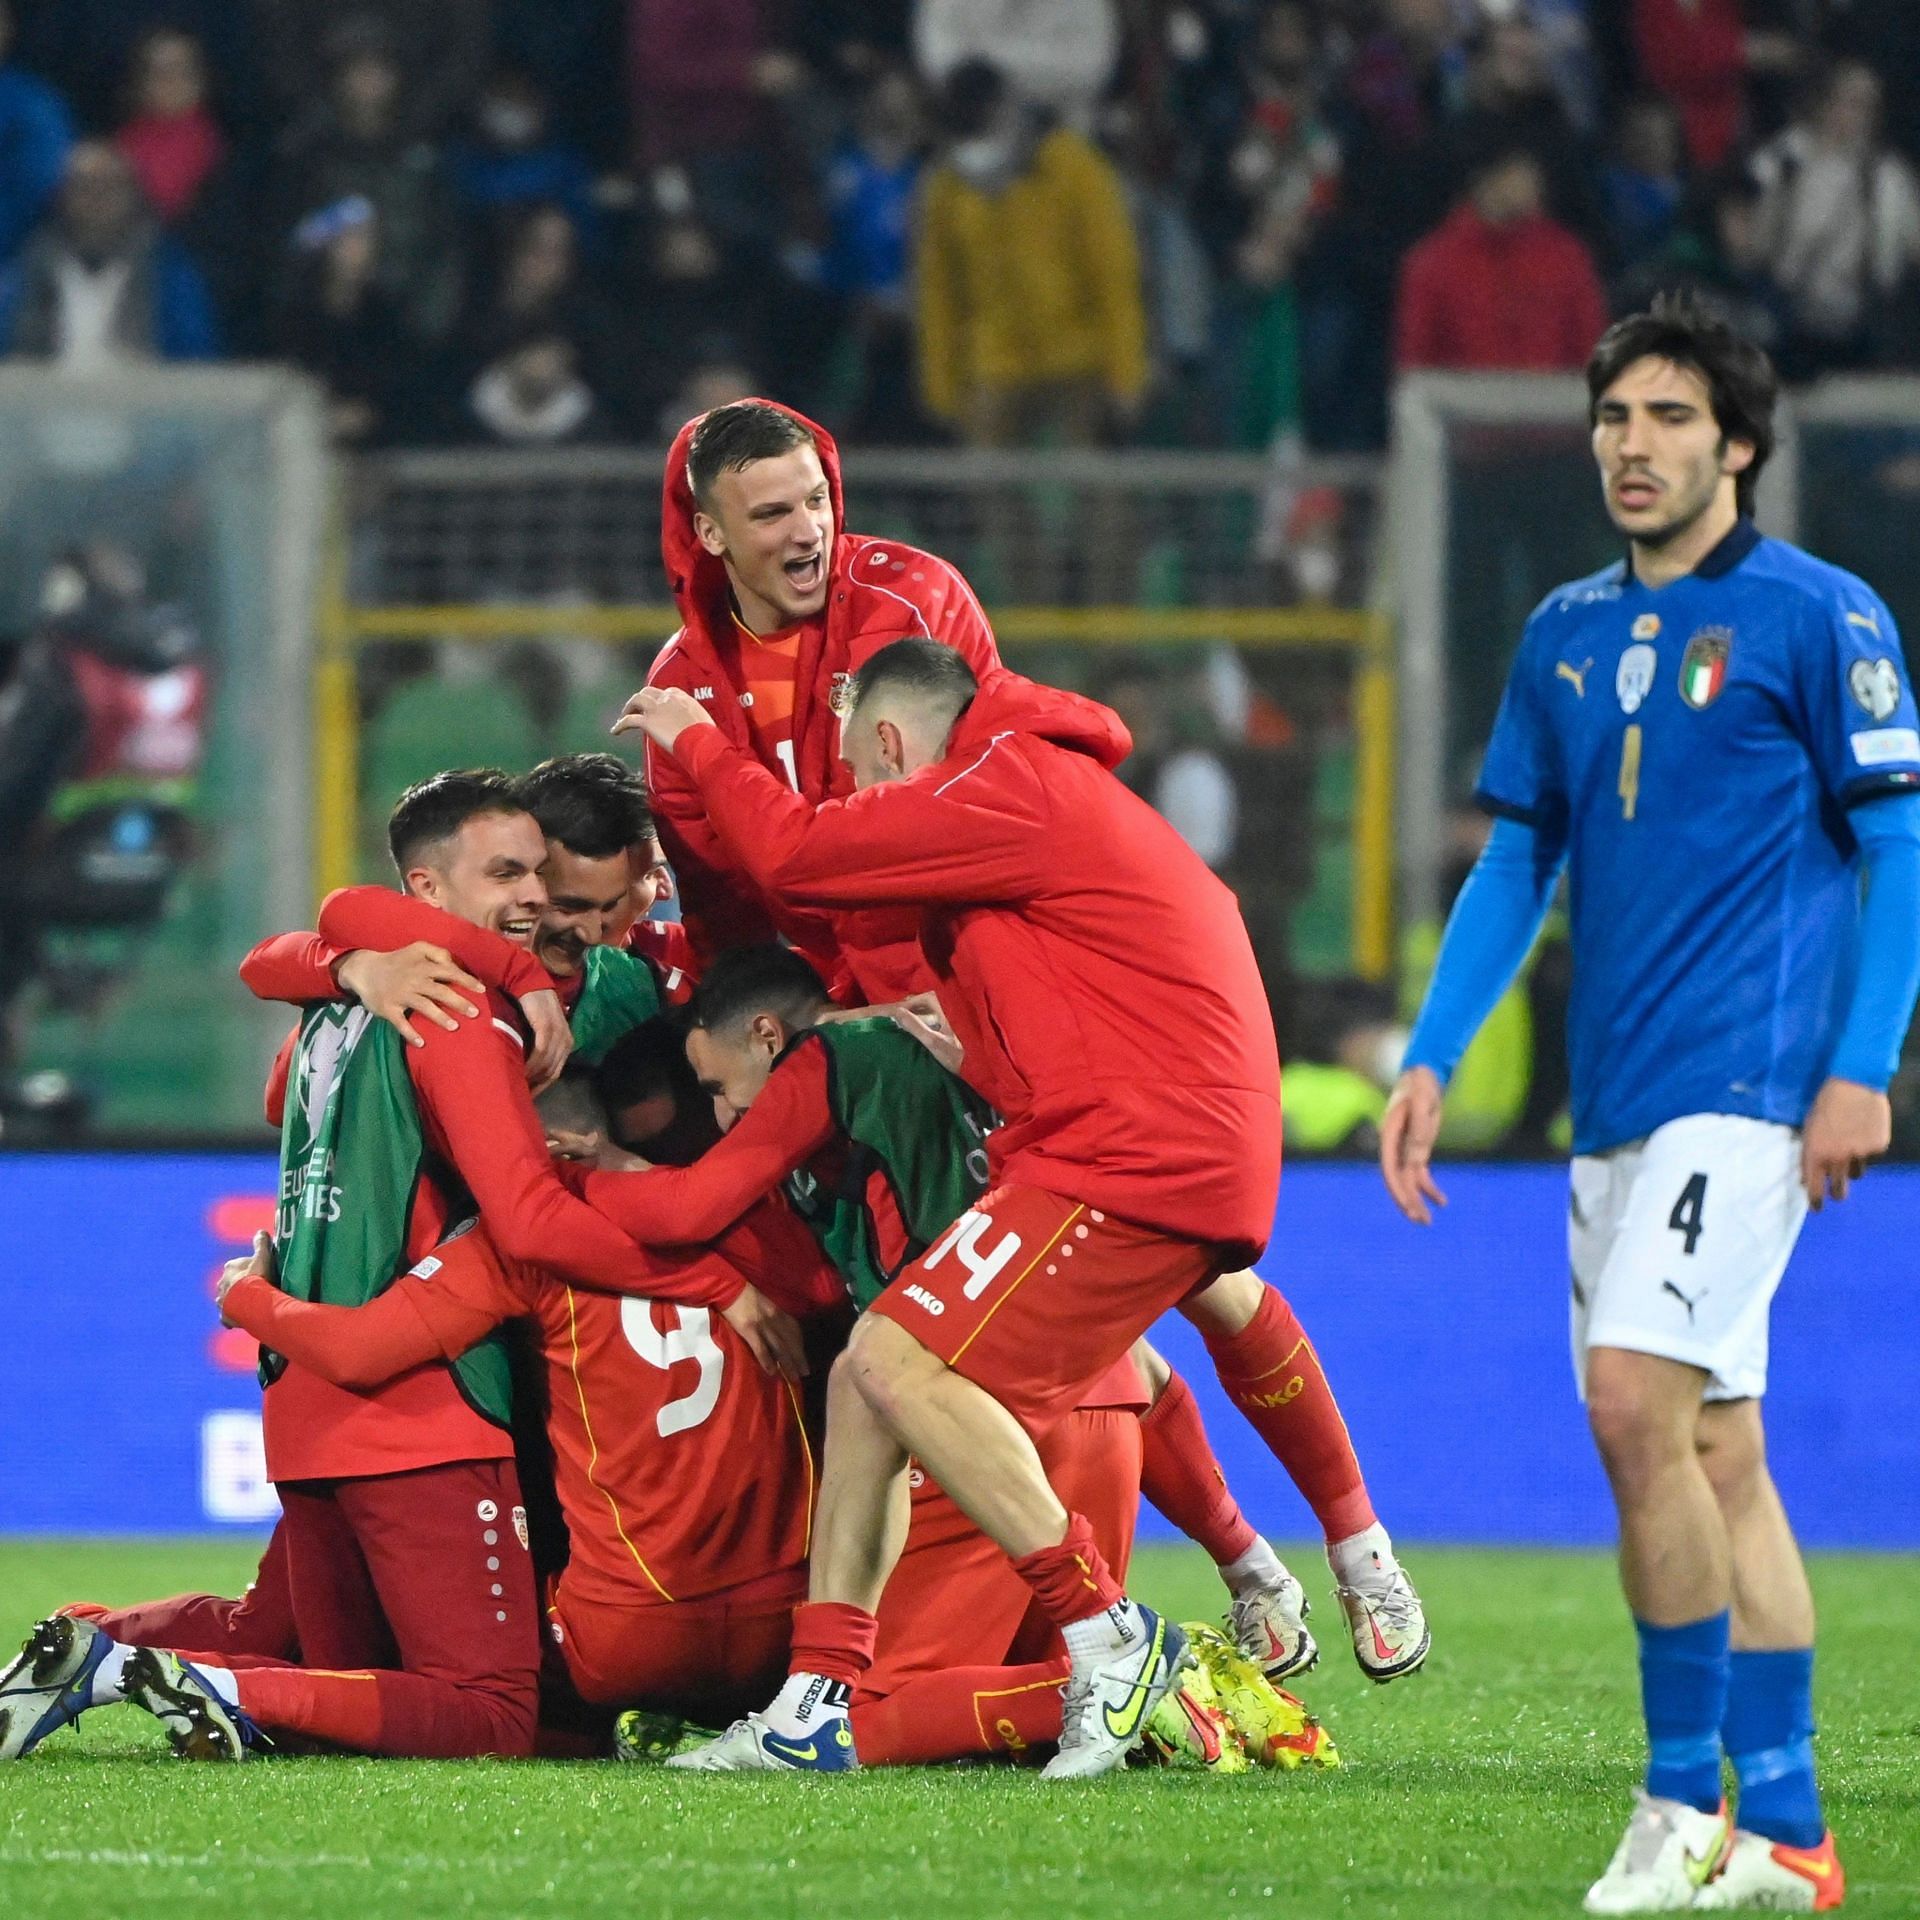 Italy had 32 goals attempts against North Macedonia